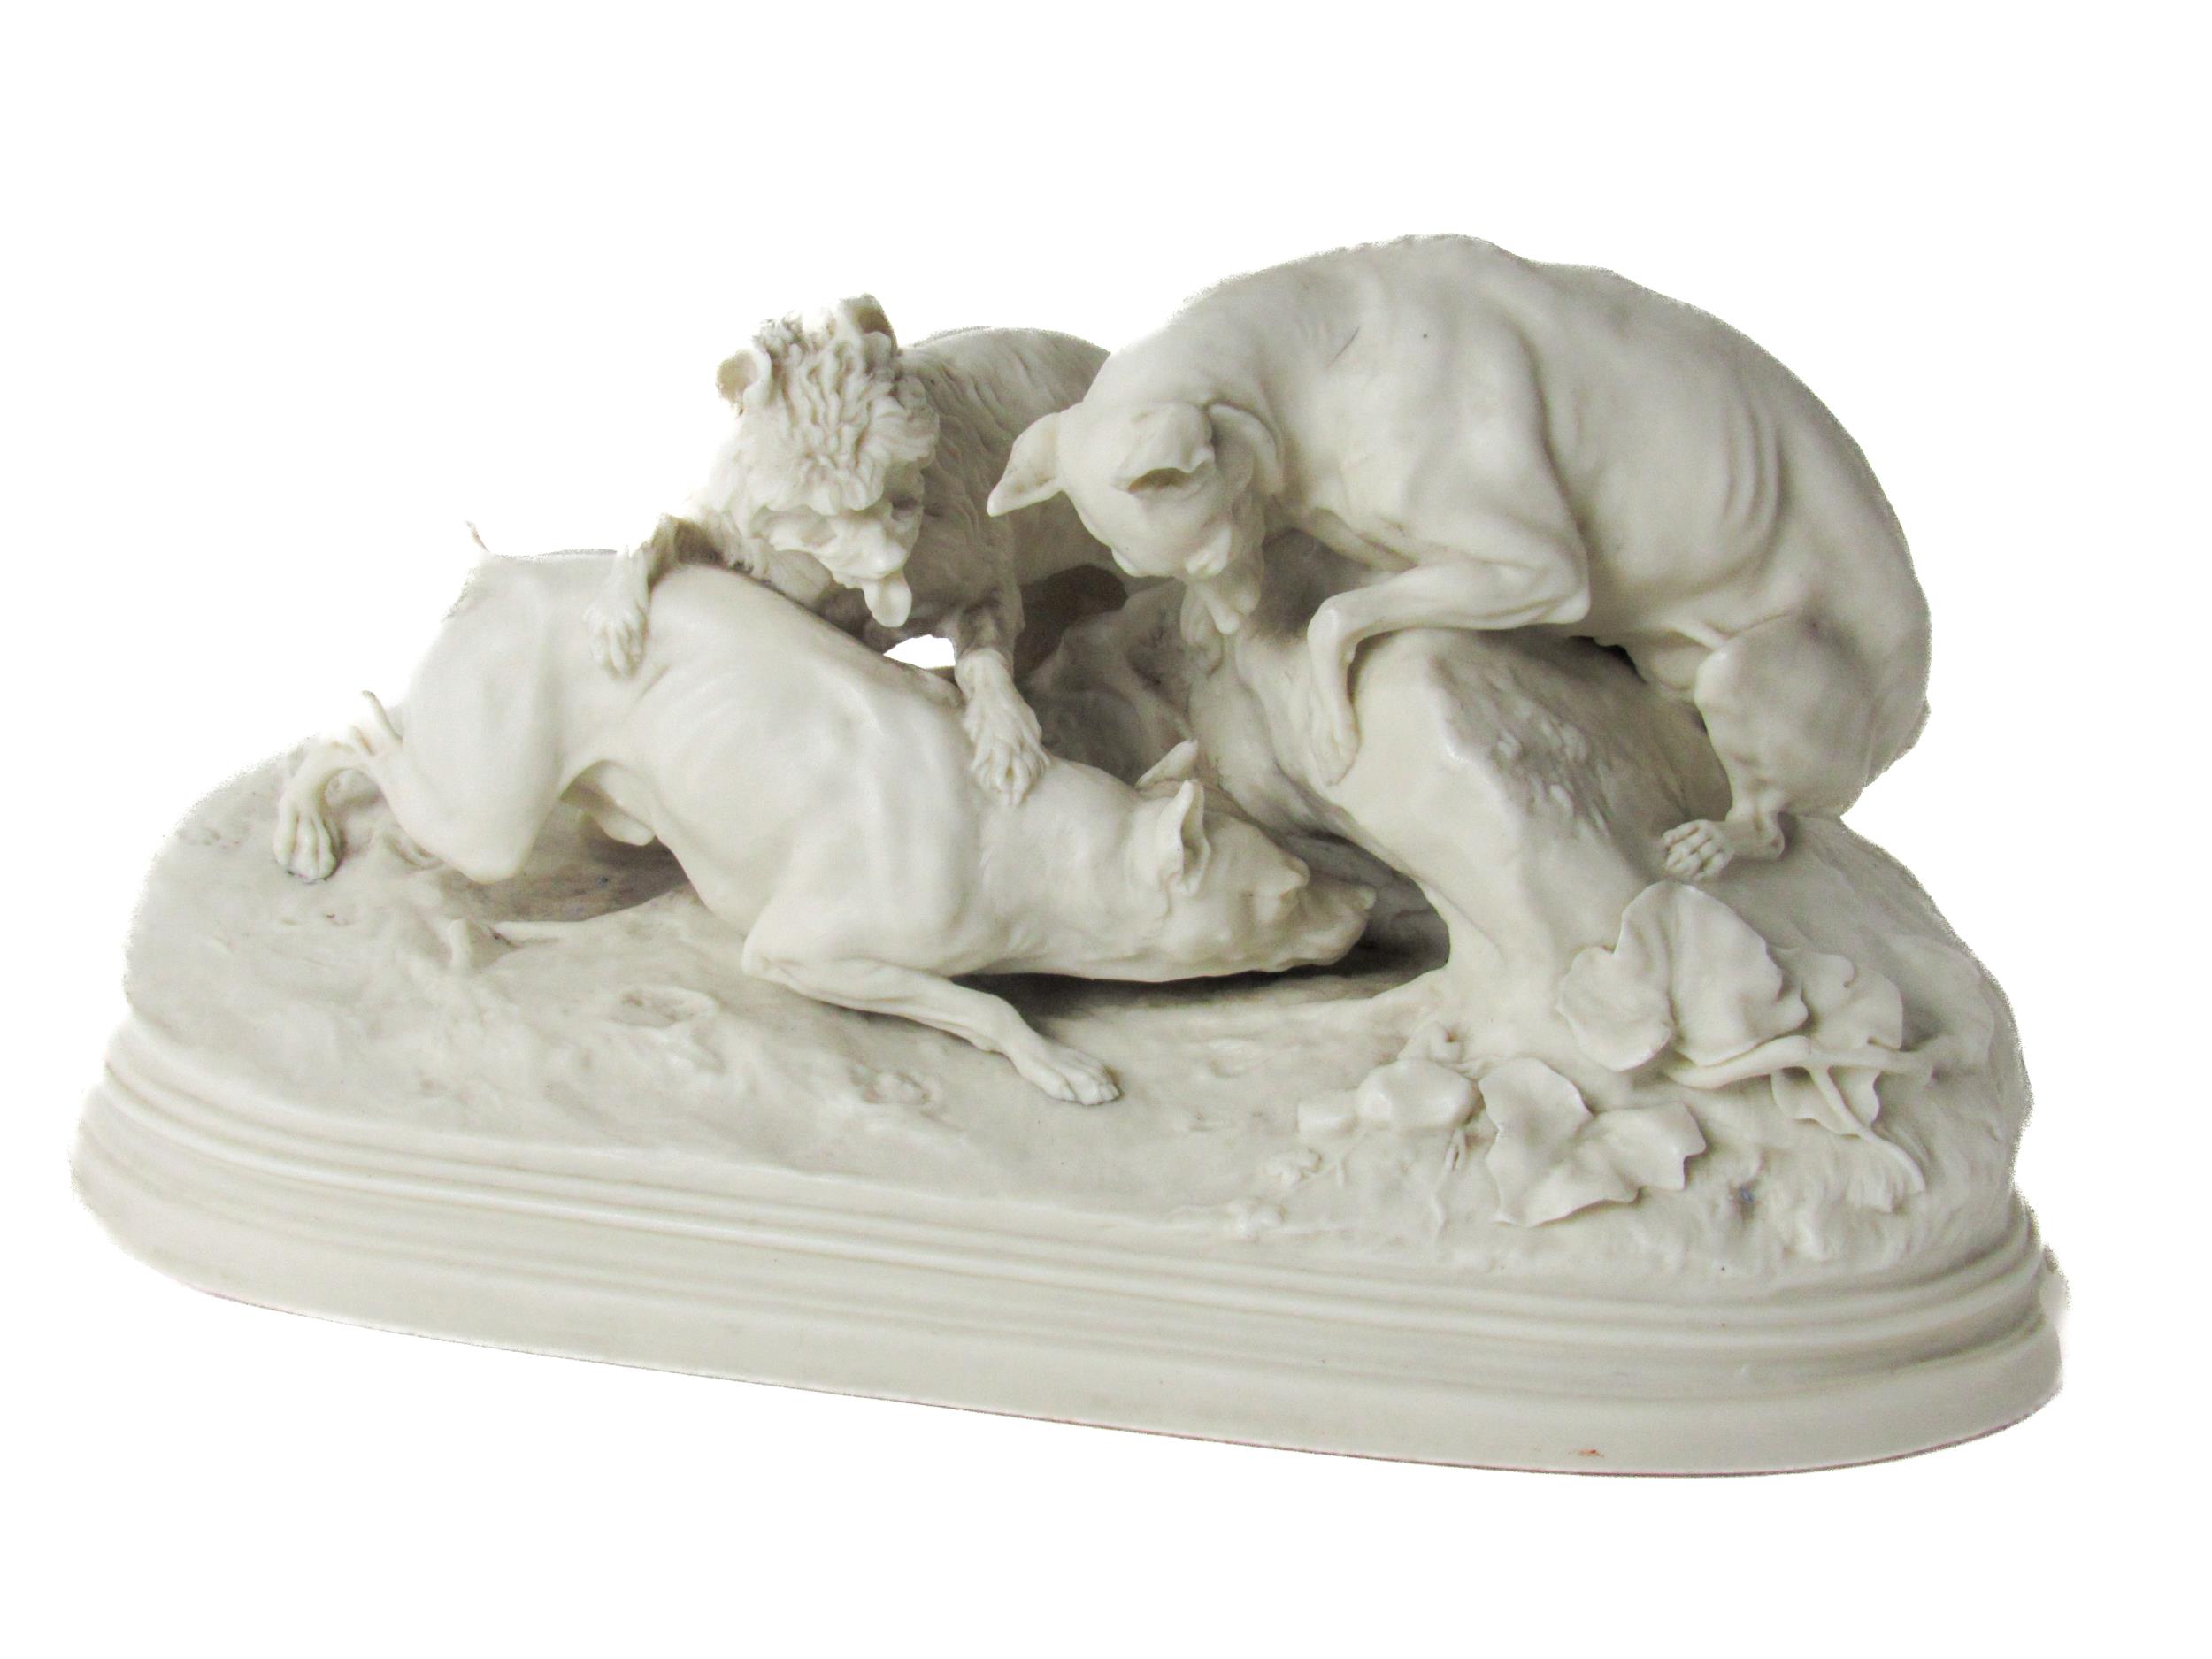 A Copeland Parian ware Model, of a group of Terriers perched outside a rabbit hole, with